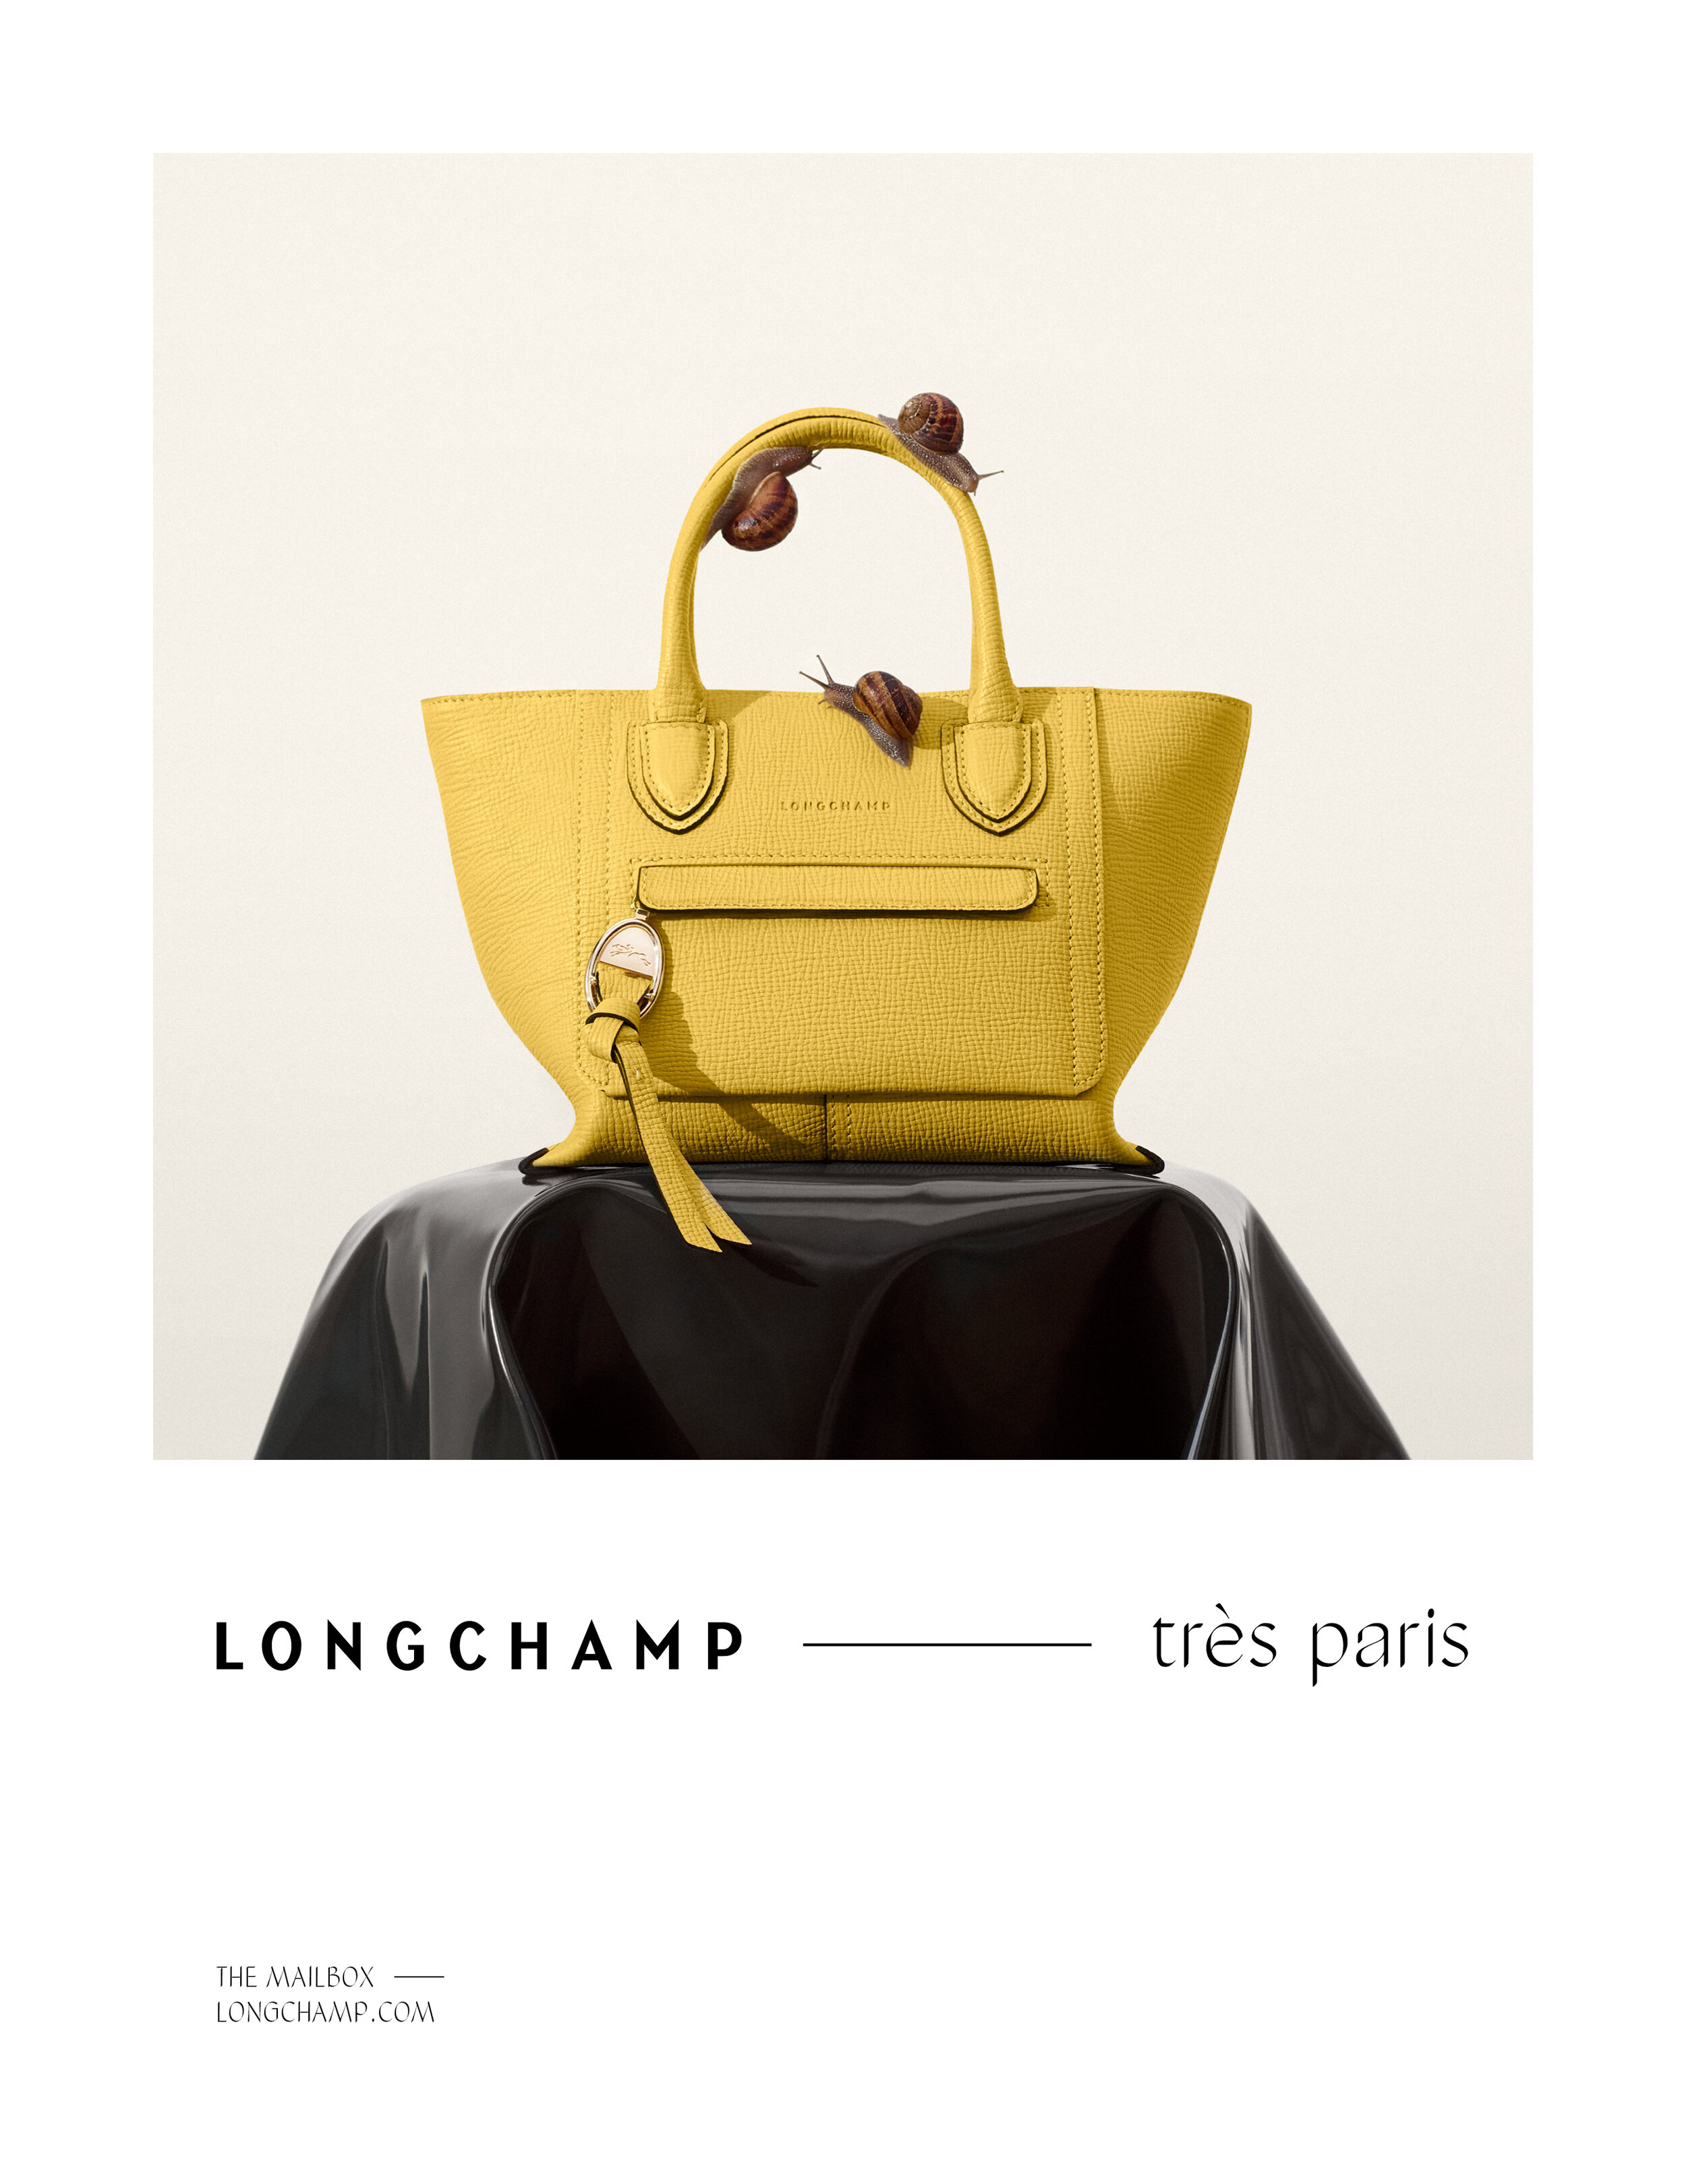 Longchamp Partners with Fred & Farid to Launch 'It is not a bag. It is Le  Pliage' Campaign